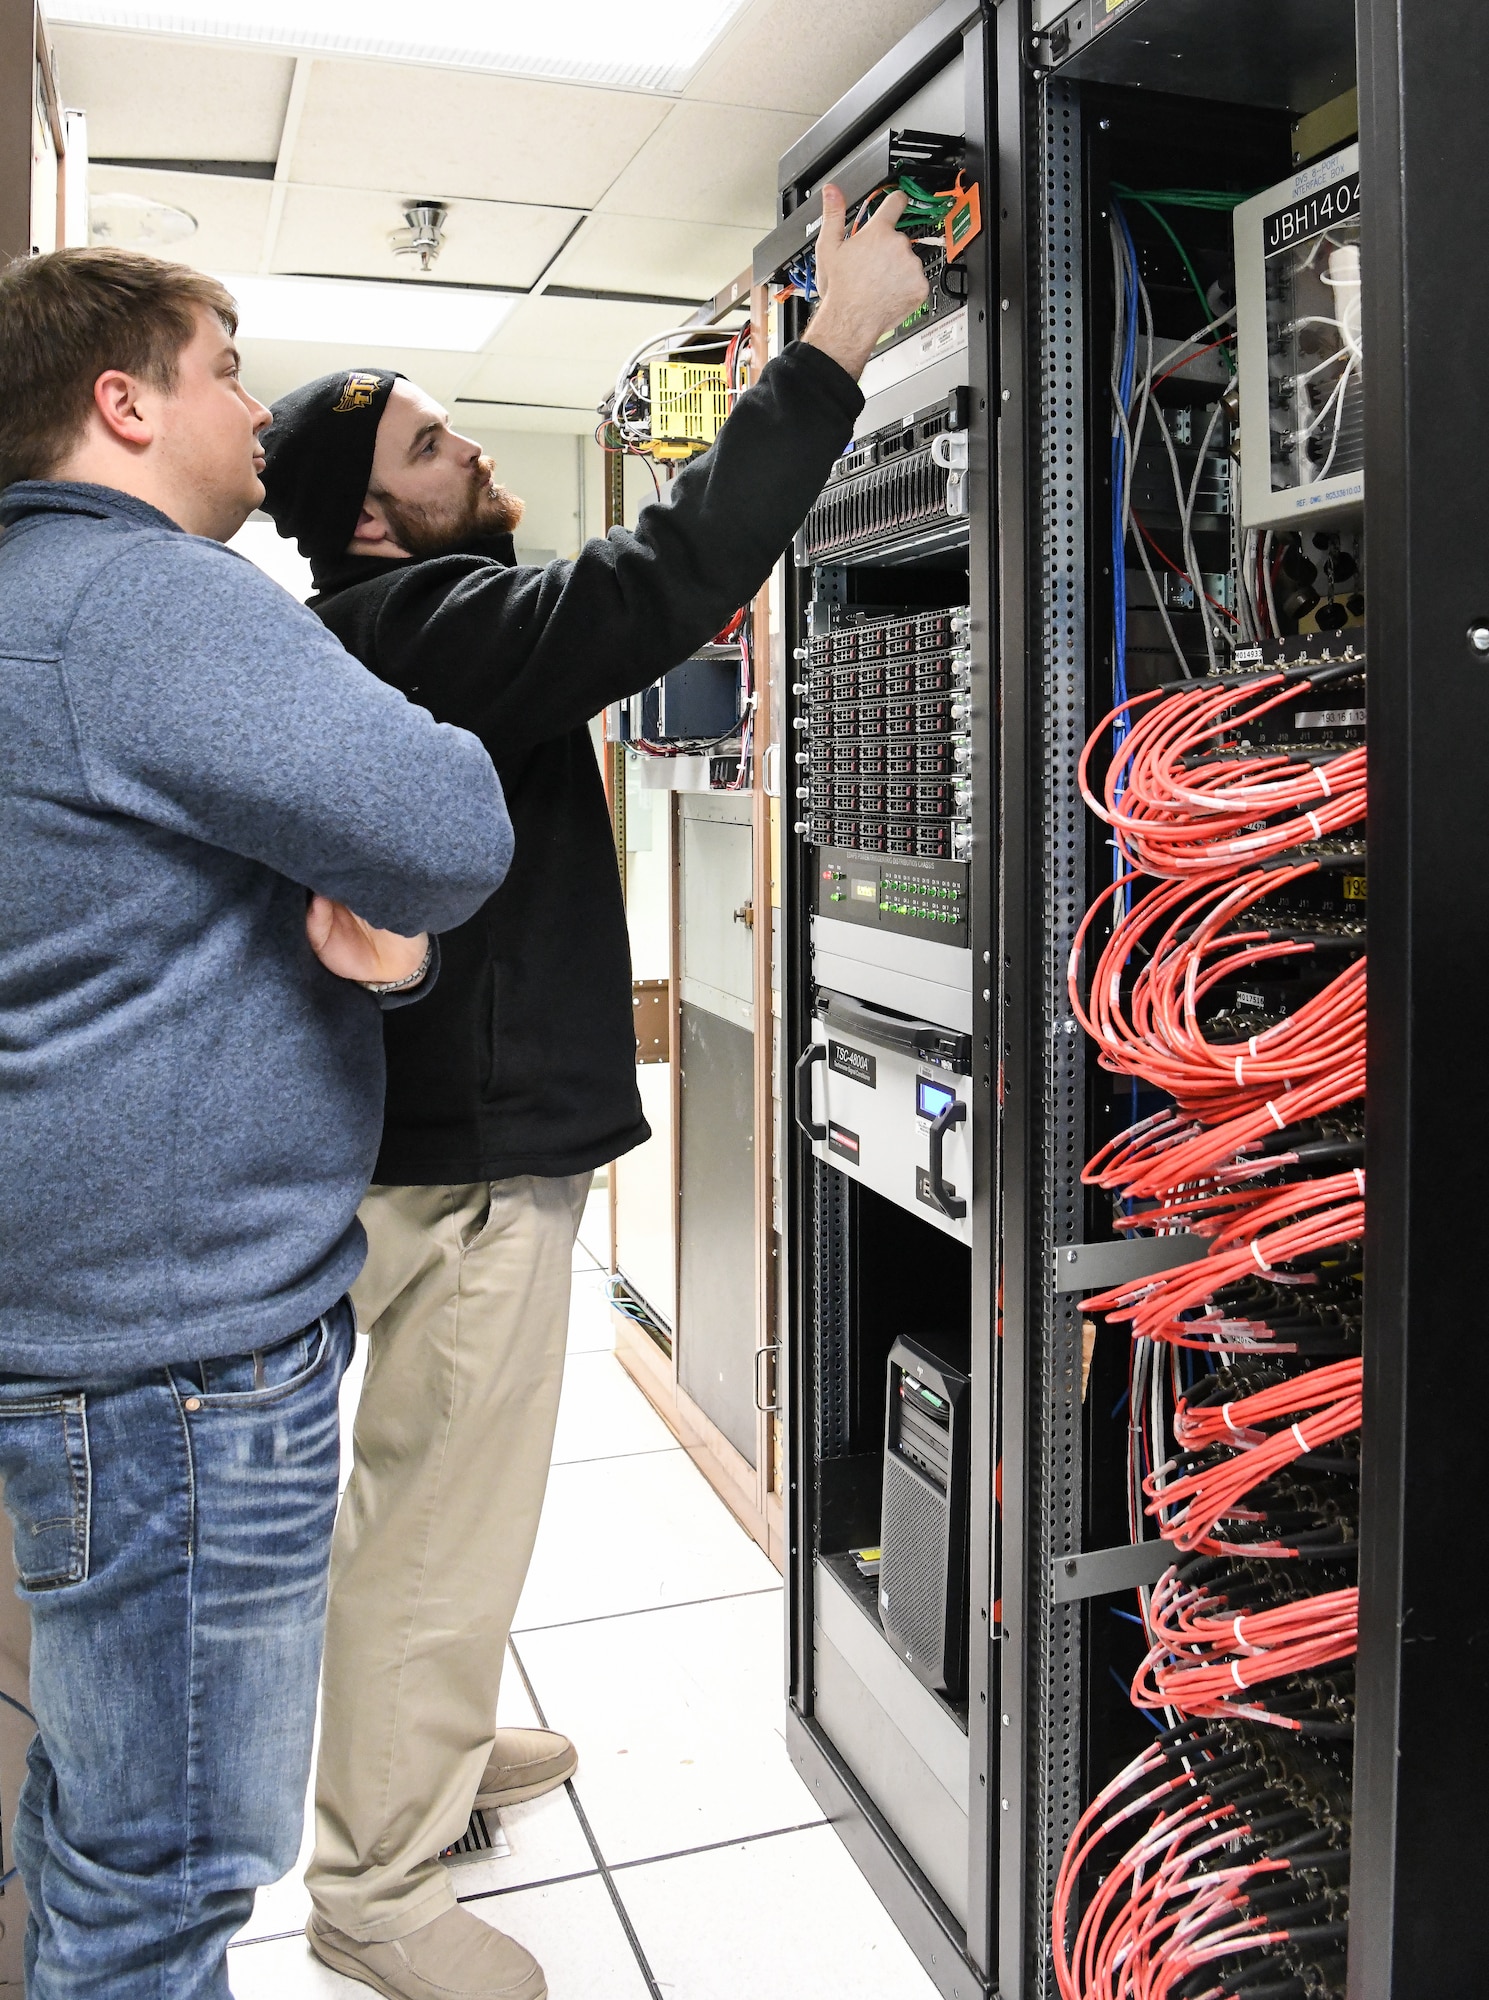 Dakota Aaron, right, an eSTARR hardware engineer, and Calvin Davis, an instrumentation, data and controls engineer, check the new network switch and data source computers in the Arnold Engineering Development Complex Engine Test Facility T-3 test cell data conditioning room at Arnold Air Force Base, Tenn., Dec. 3. The network switch and data source computers are part of upgrades to the test cell, including the new digital voltage scanners at the right. (U.S. Air Force photo by Jill Pickett)